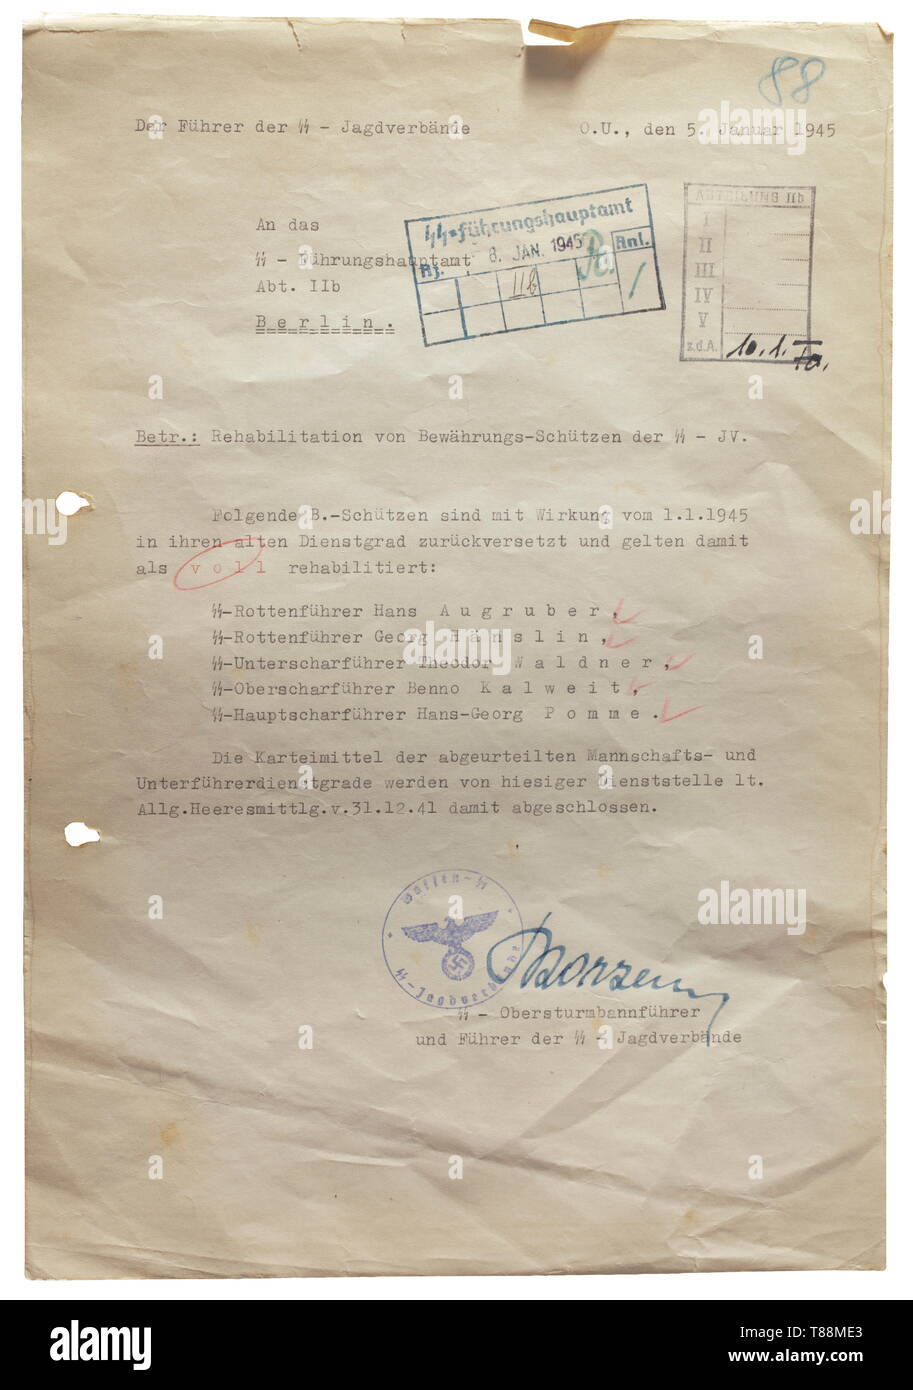 Otto Skorzeny A letter to the SS Leadership Main Office regarding rehabilitation of guarded parolees of the SS Jagdverbände dated '5. Januar 1945'. Handwritten signature 'Skorzeny' in ink above 'SS-Obersturmbannführer und Führer der SS- Jagdverbände'. Stamped, holed, edge tears, kinks, signs of age. A rare autograph. historic, historical, 20th century, 1930s, 1940s, Waffen-SS, armed division of the SS, armed service, armed services, NS, National Socialism, Nazism, Third Reich, German Reich, Germany, military, militaria, utensil, piece of equipment, utensils, object, objects, Editorial-Use-Only Stock Photo